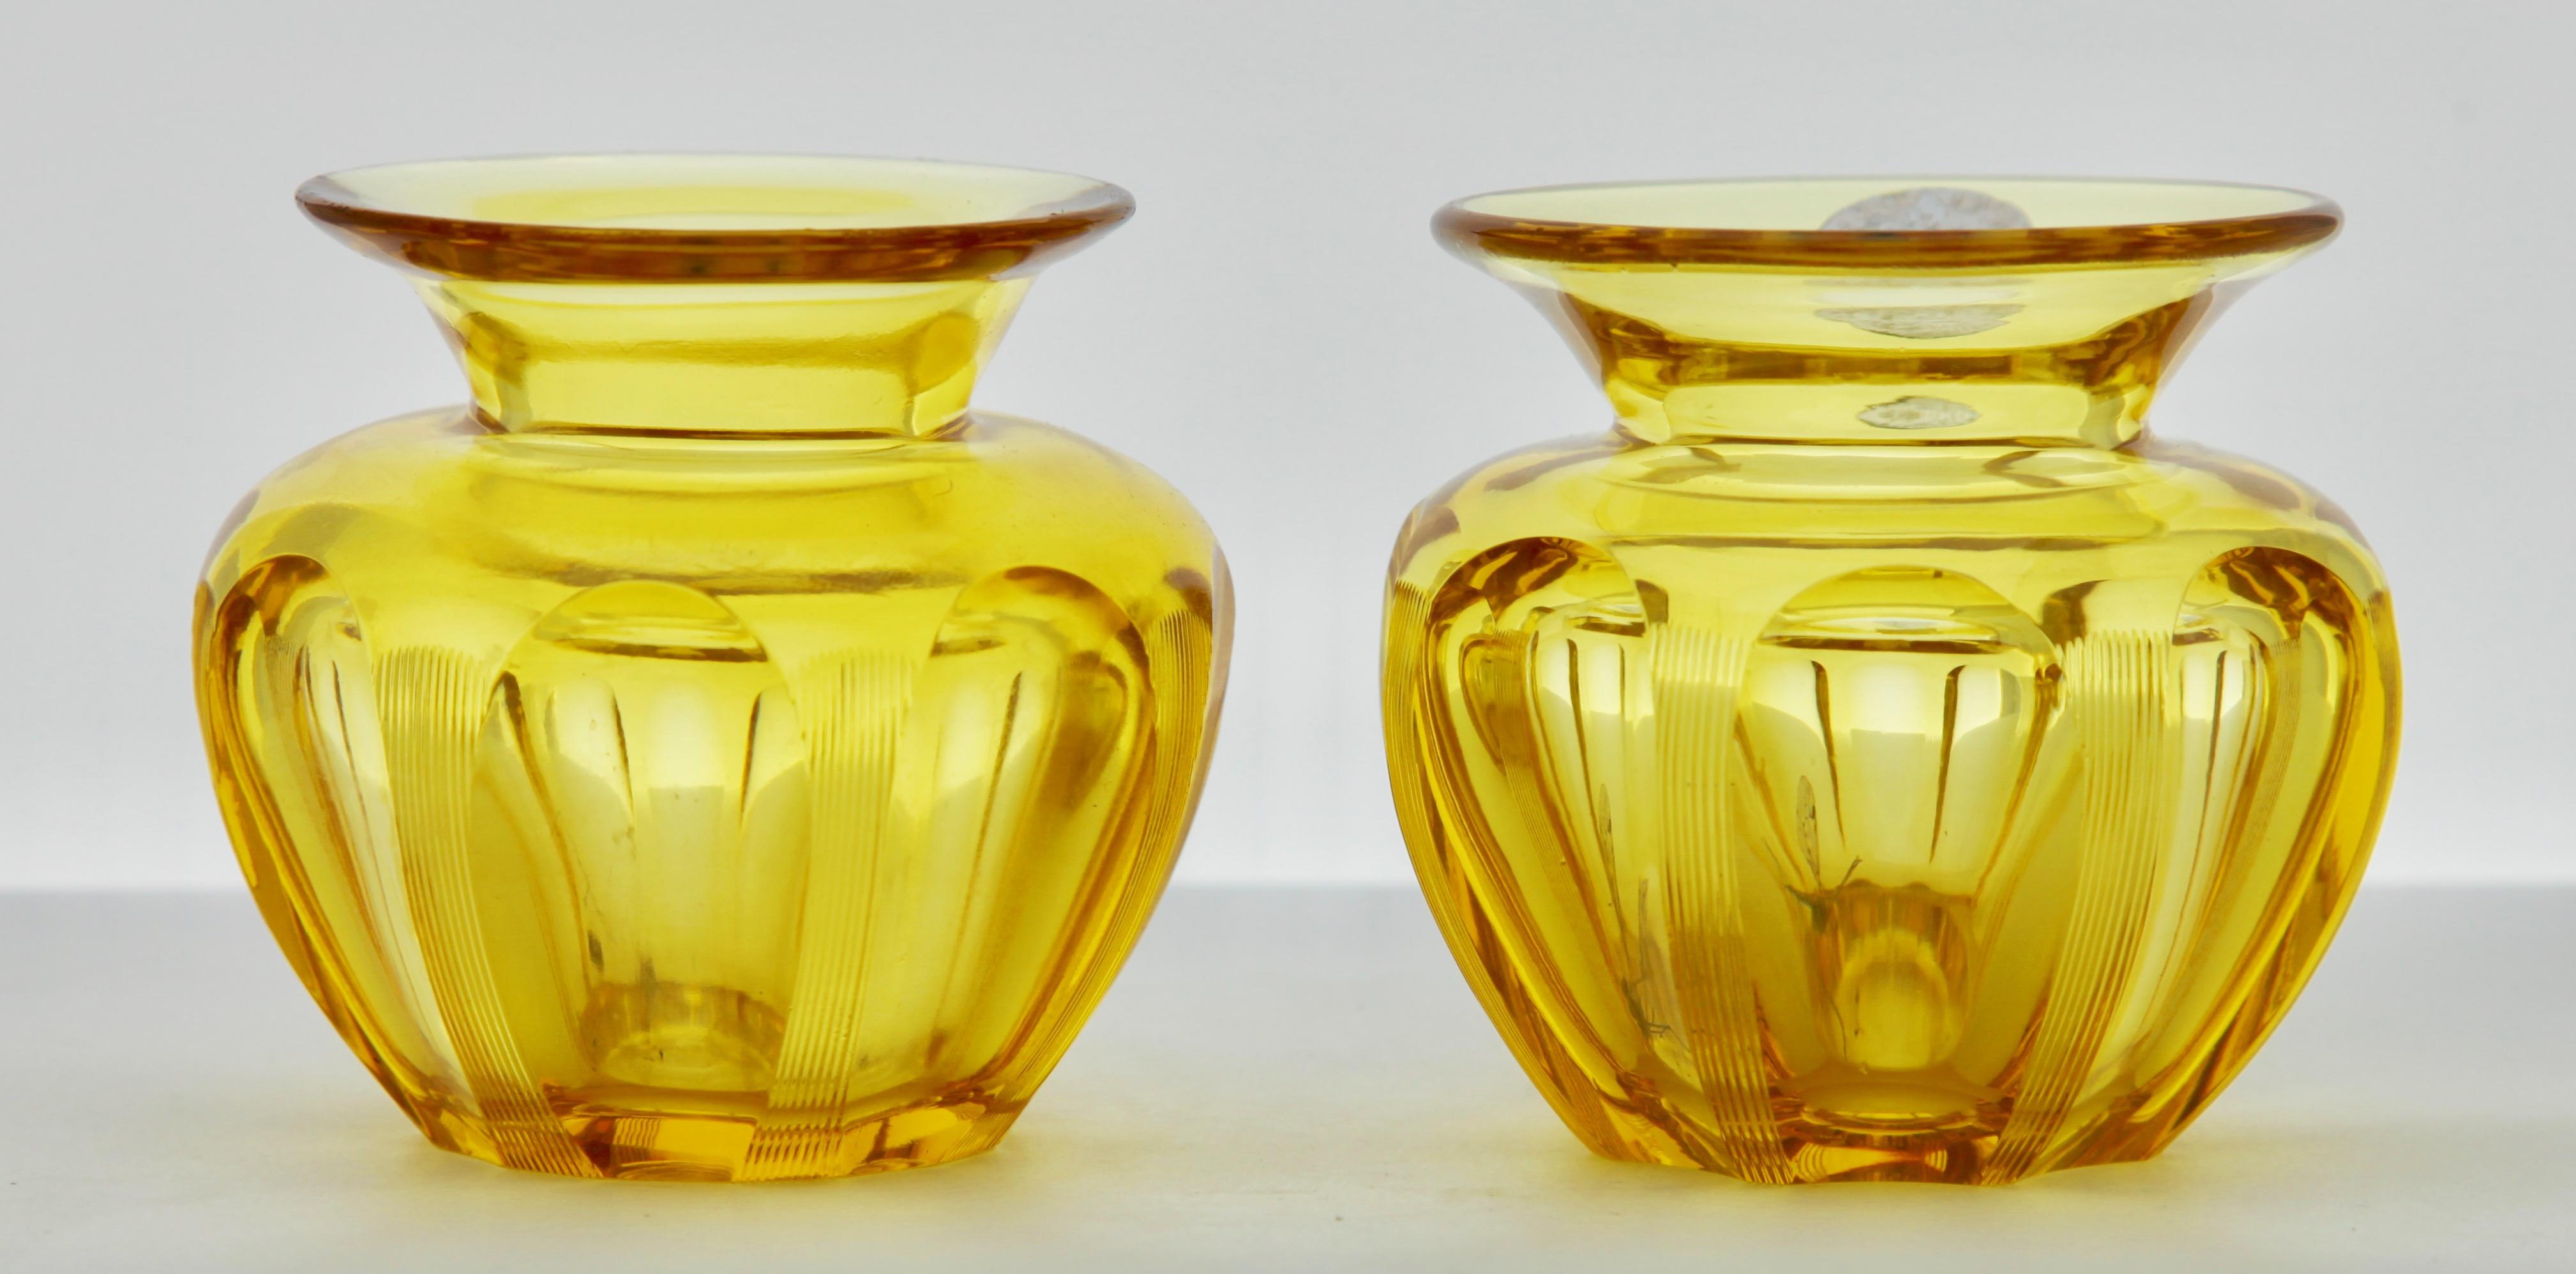 Faceted Gold-Amber Matching Pair of Cut Crystal Table Vases, with Sticker WMF